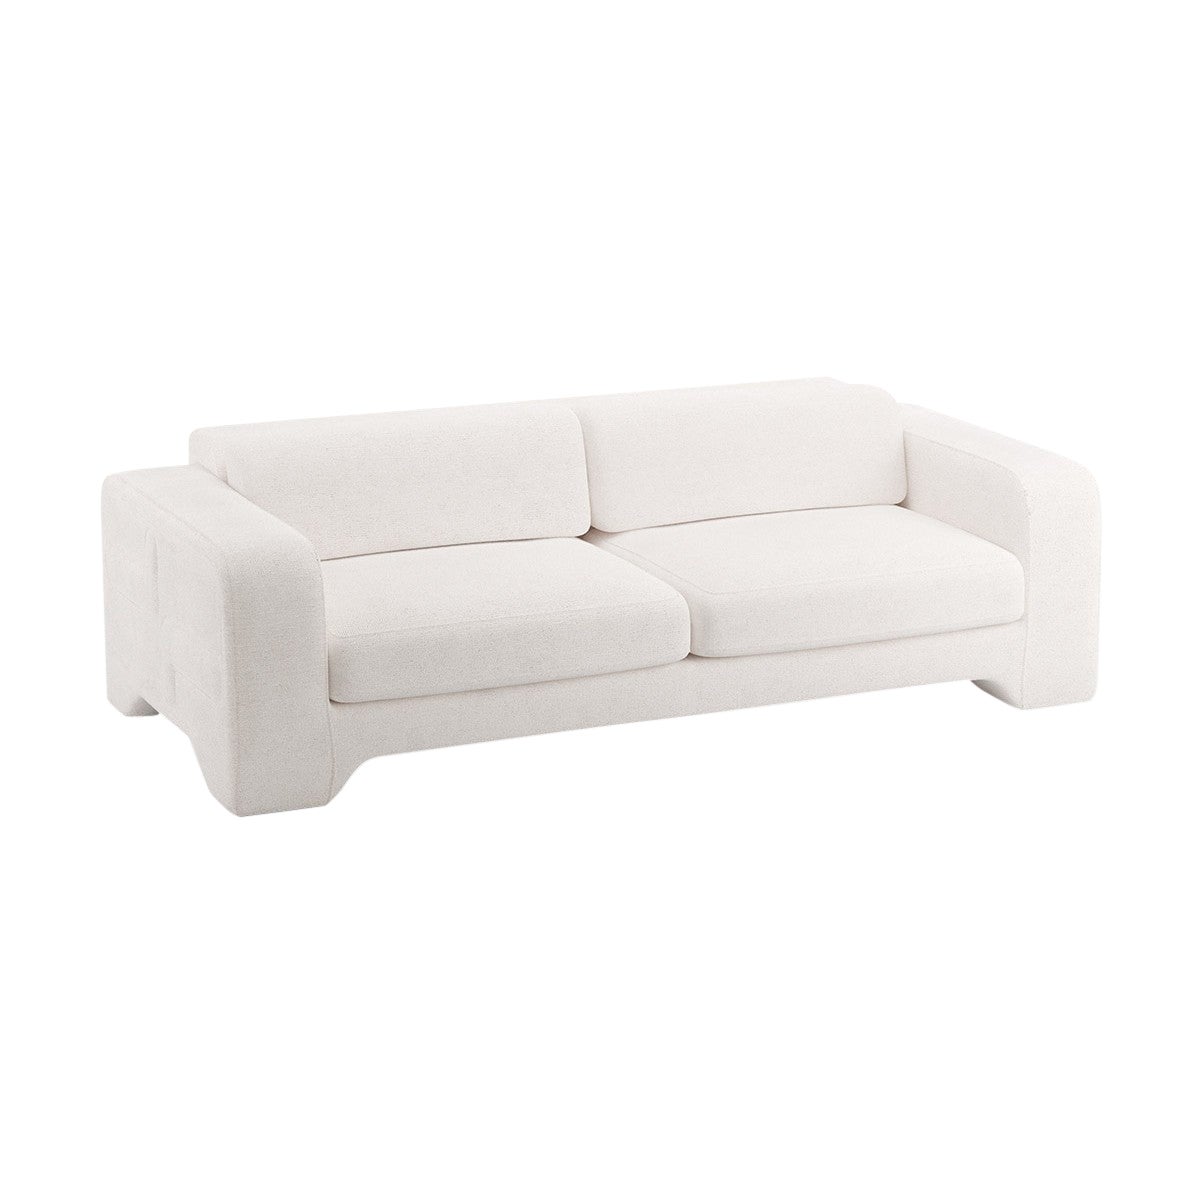 Popus Editions Giovanna 2.5 Seater Sofa in Ivory Megeve Fabric with Knit Effect